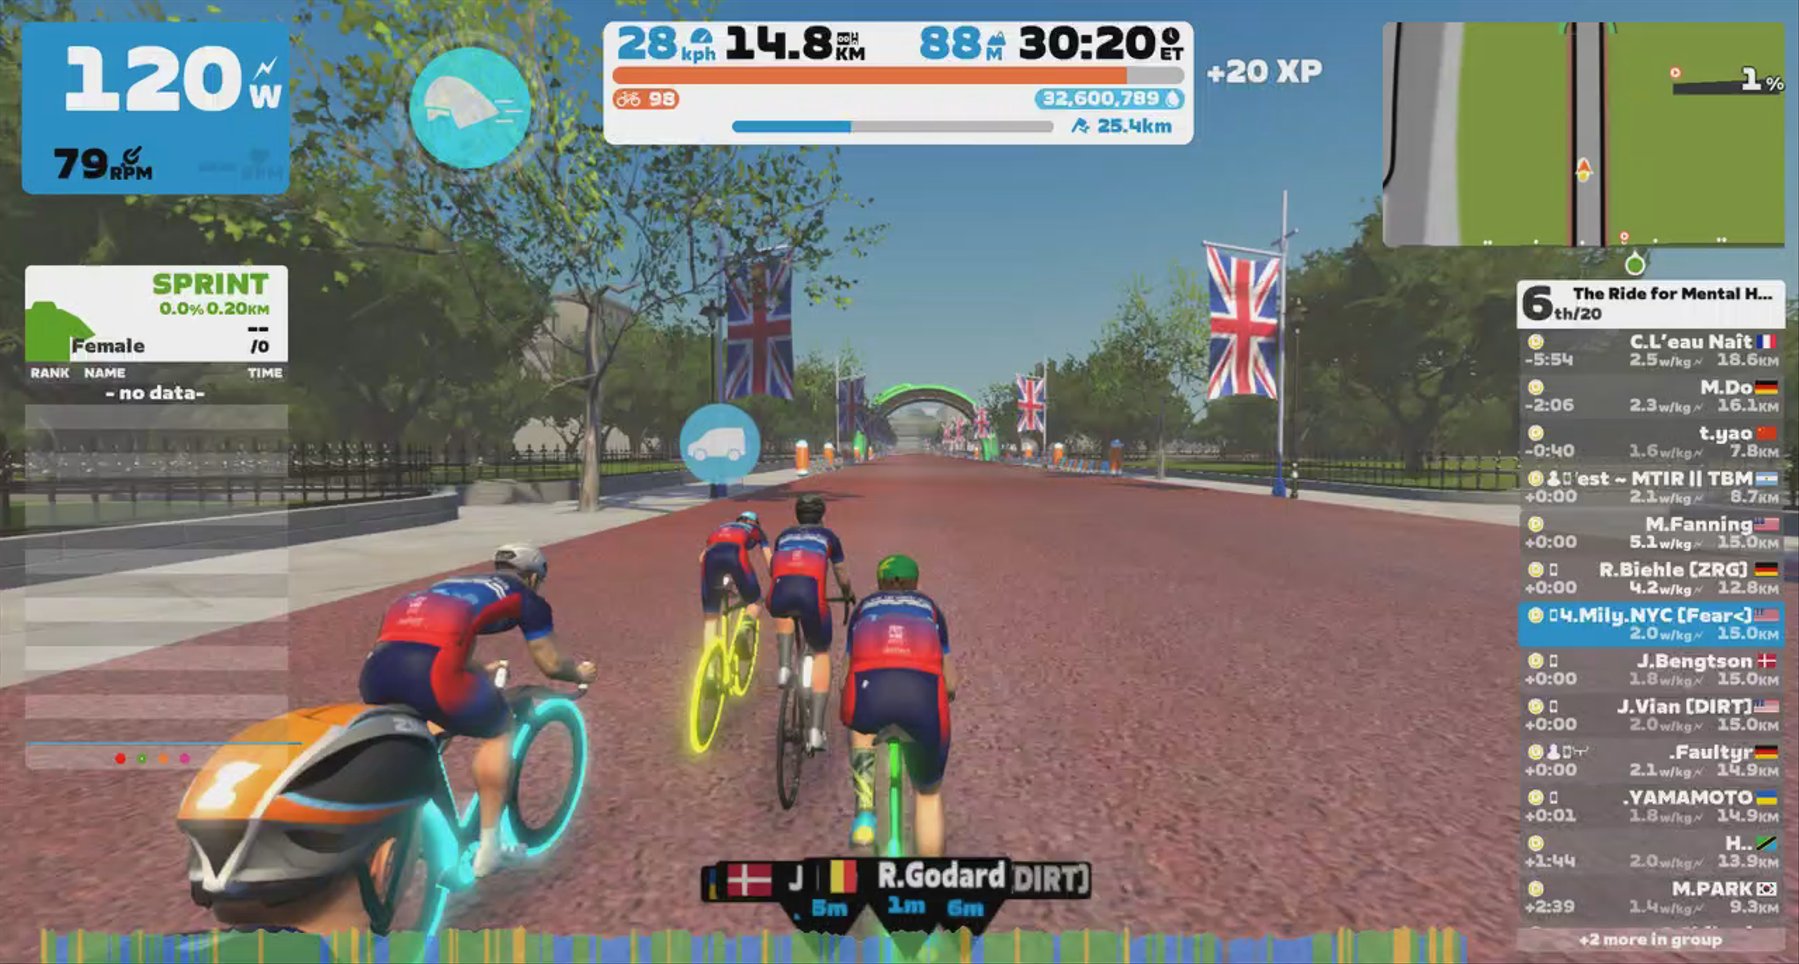 Zwift - Group Ride: The Ride for Mental Health presented by Bear Mountaineers (D) on The London Pretzel in London